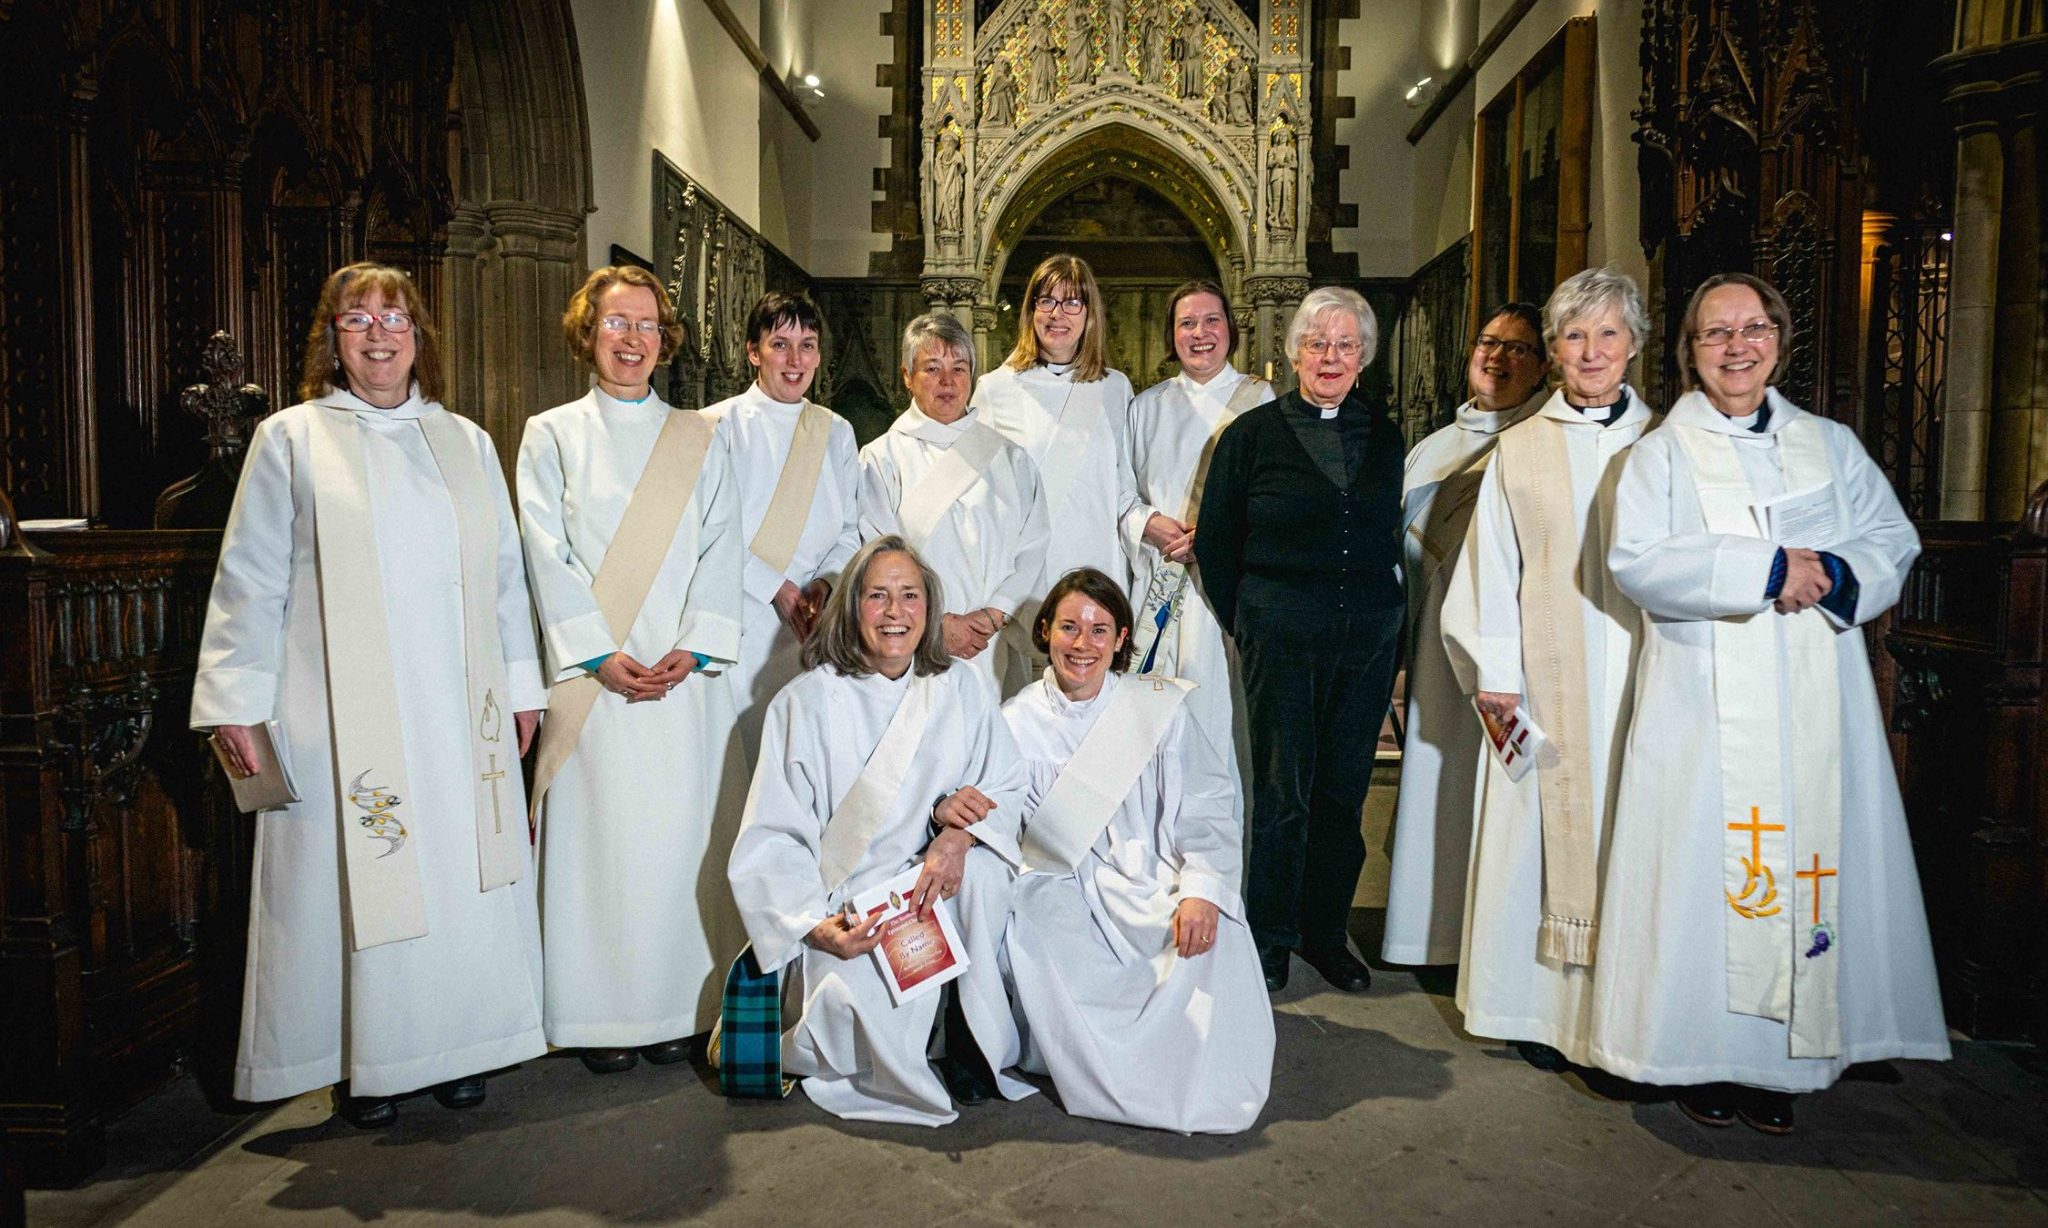 The Scottish Episcopal Church ceremony in Perth celebrating 25 years since the first women were ordained